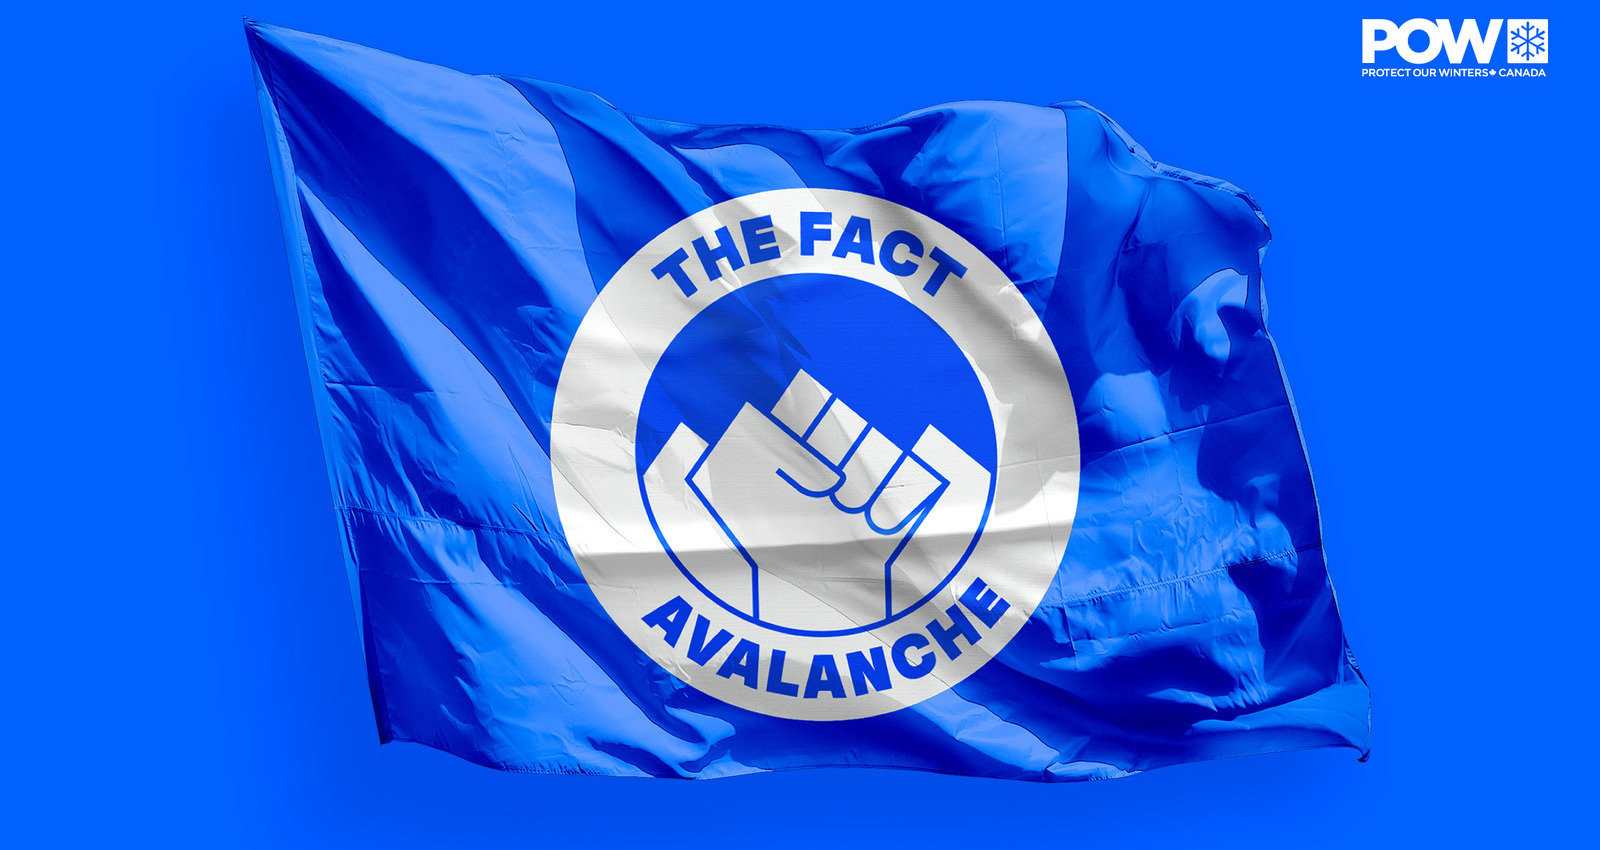 Fact Avalanche